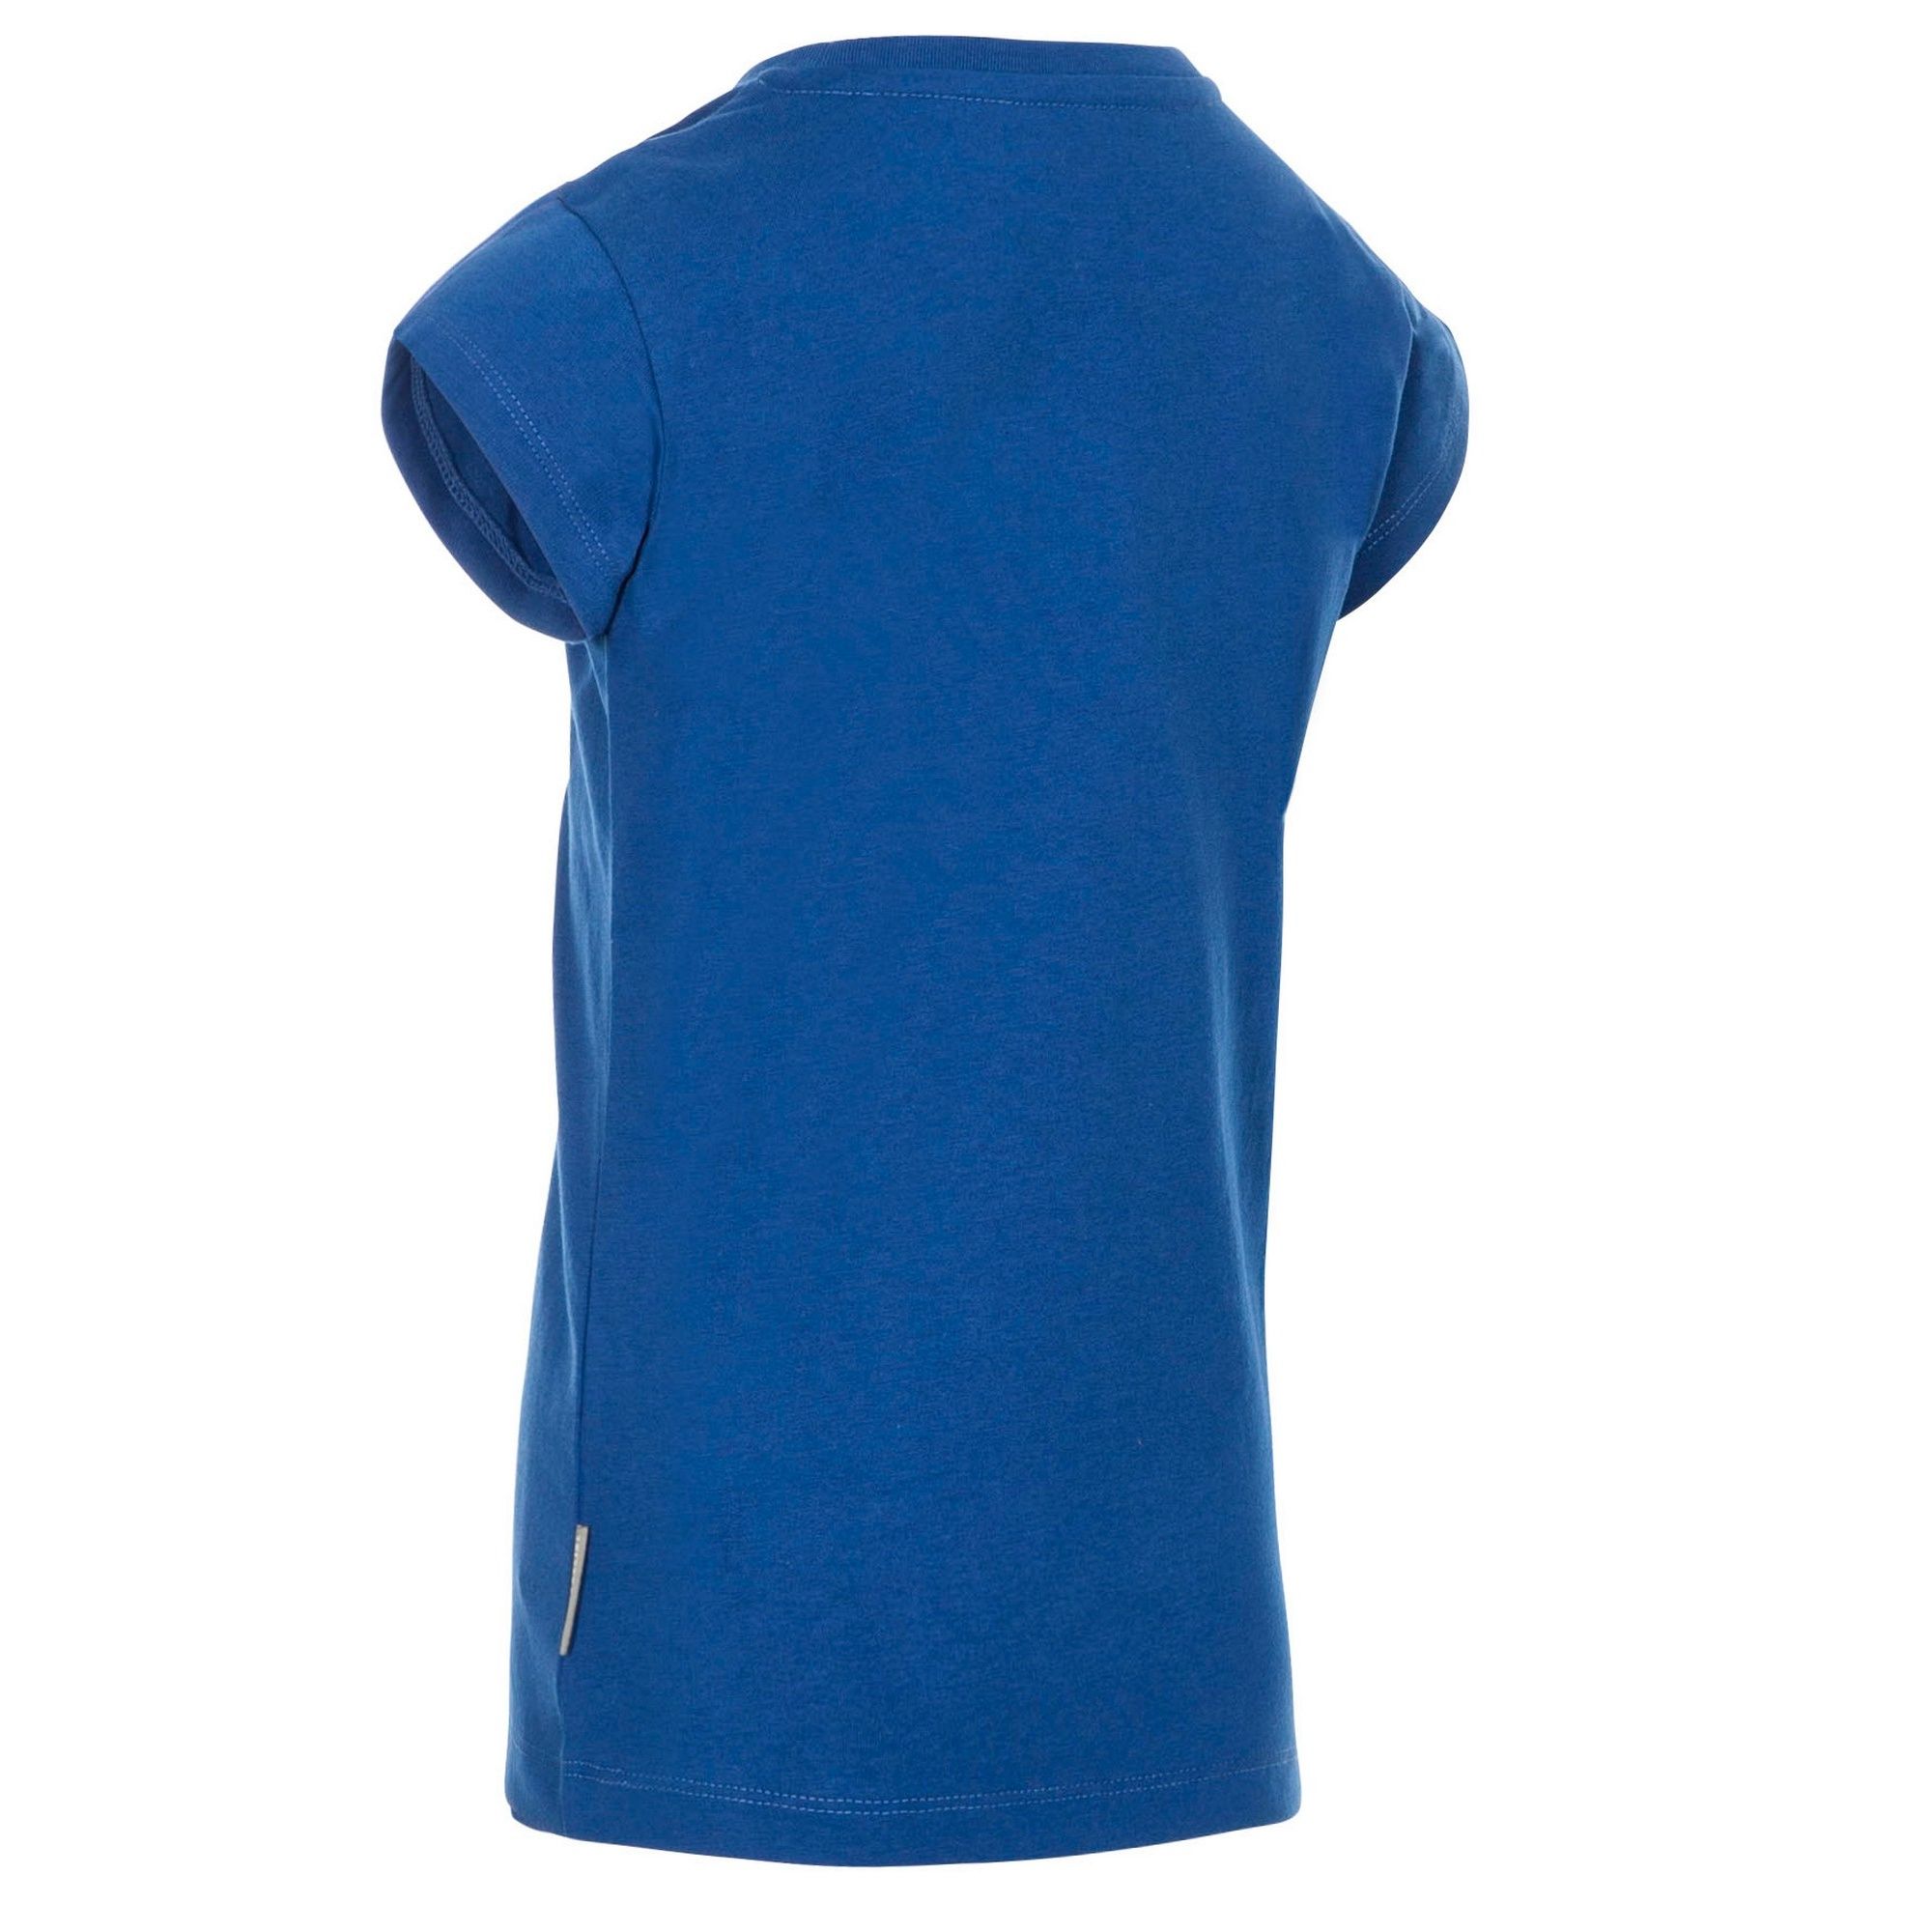 60% Cotton, 40% Polyester. Round neck. Print on the front. Quick dry. Trespass Childrens Chest Sizing (approx): 2-3 Years - 21in/53cm, 3-4 Years - 22in/56cm, 5-6 Years - 24in/61cm, 7-8 Years - 26in/66cm, 9-10 Years - 28in/71cm, 11-12 Years - 31in/79cm.